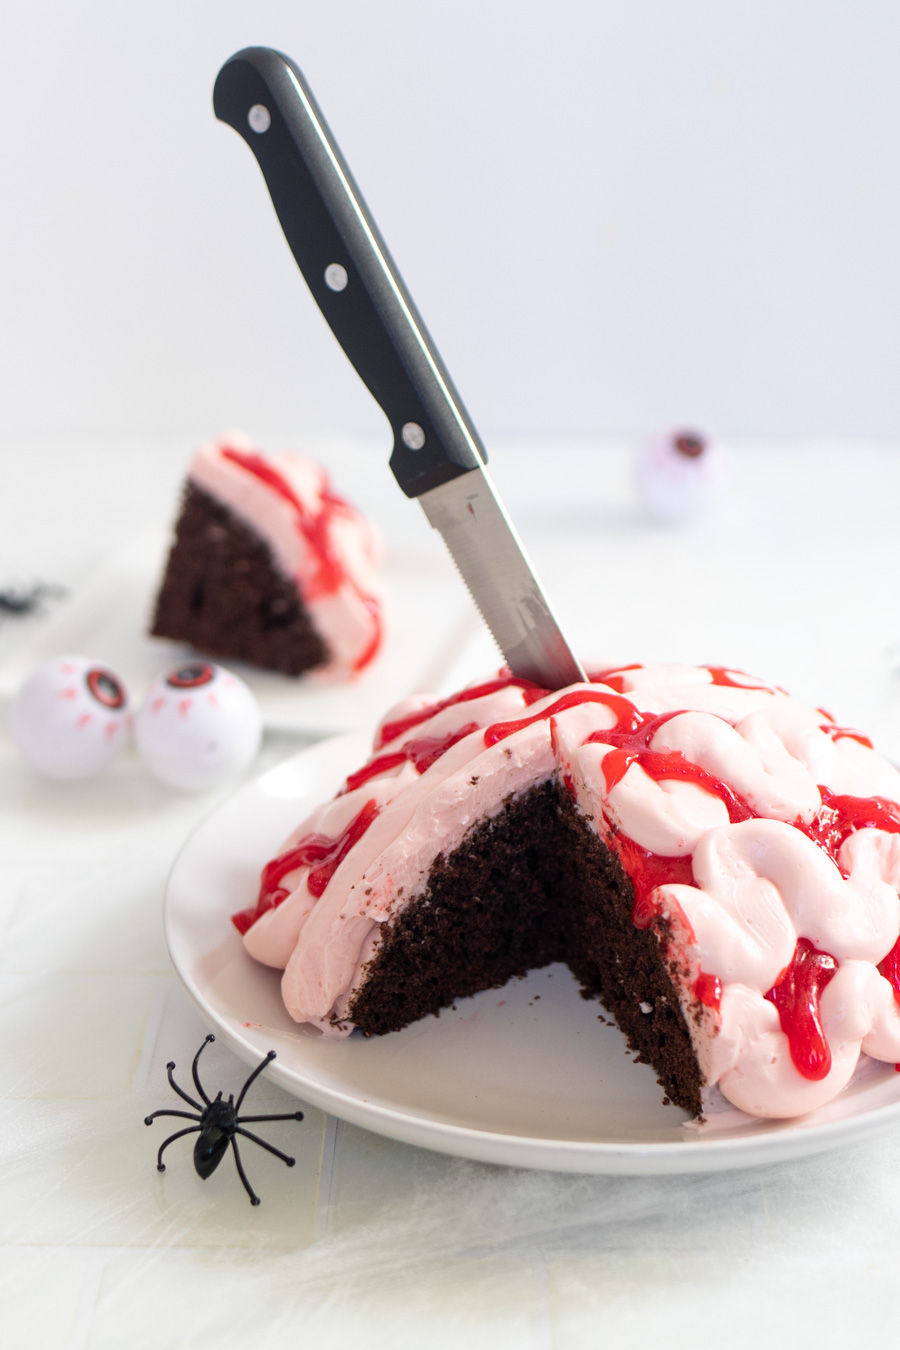 Whether you need a Halloween dessert or a spooky-themed party cake, this Zombie Brain Cake is perfect! Dark chocolate cake with vanilla frosting and bloody effects is the ultimate party food!